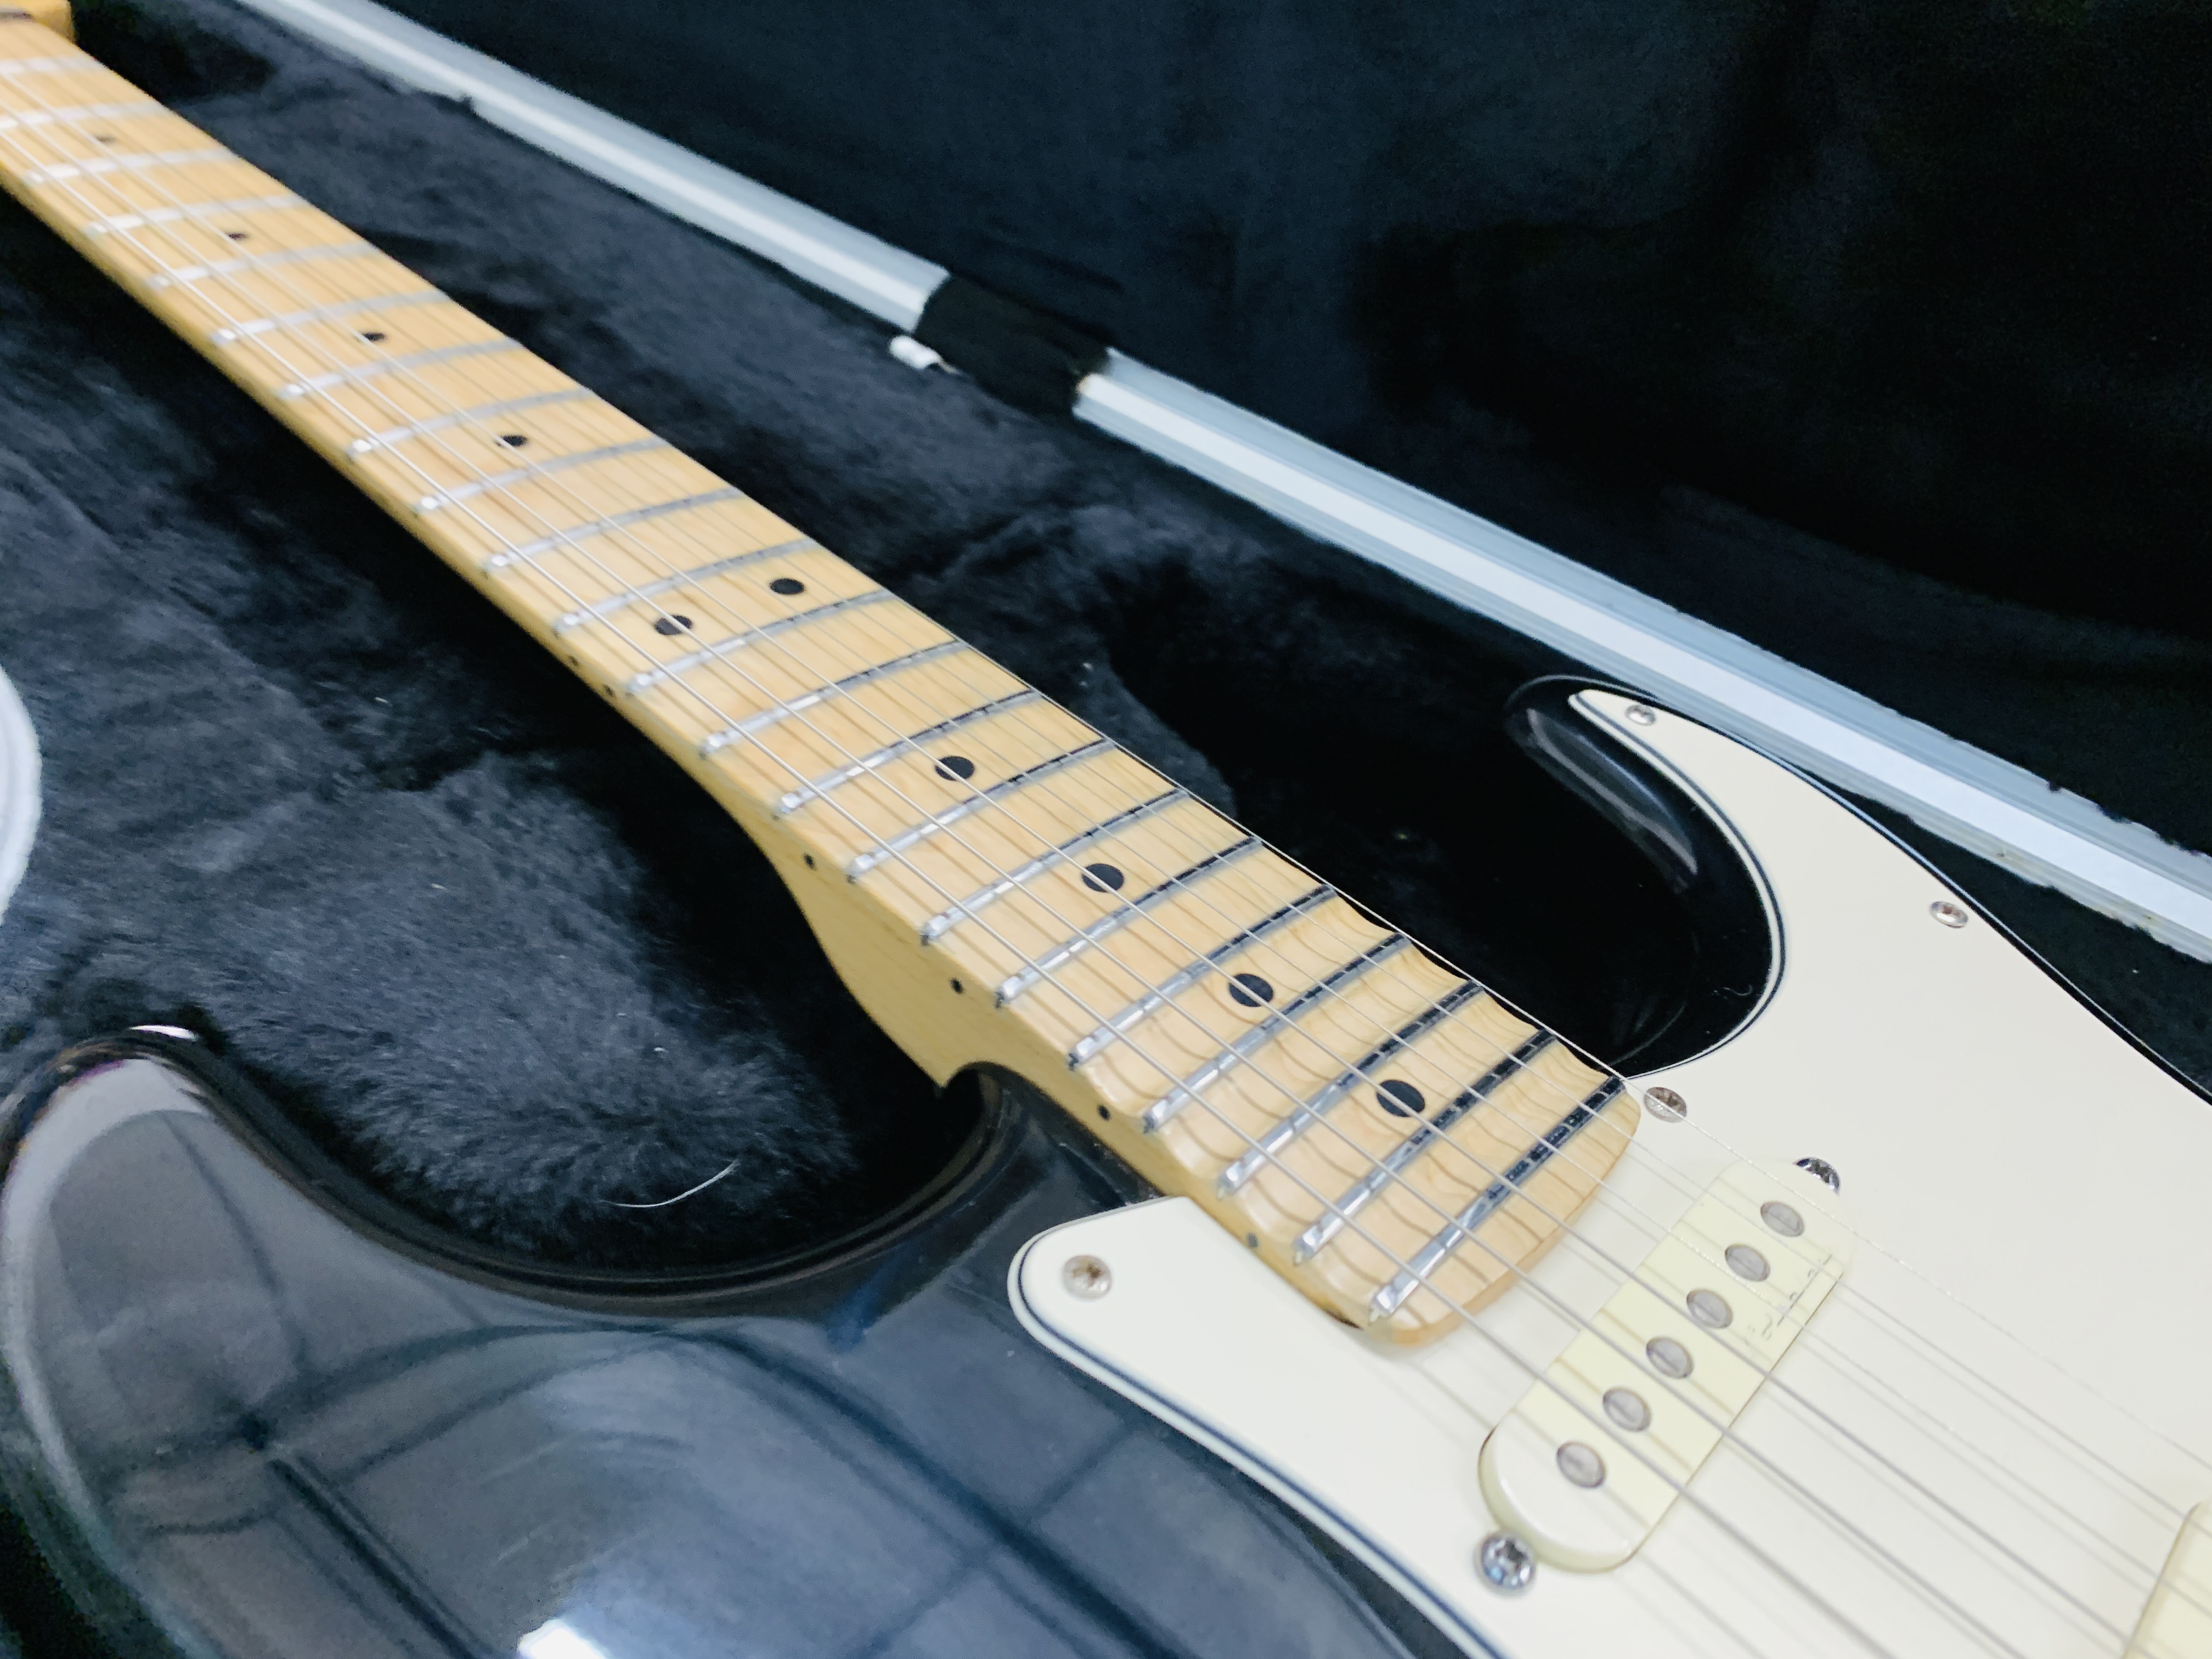 1 X UPGRADED USA FENDER STRATOCASTER GUITAR. - Image 5 of 10